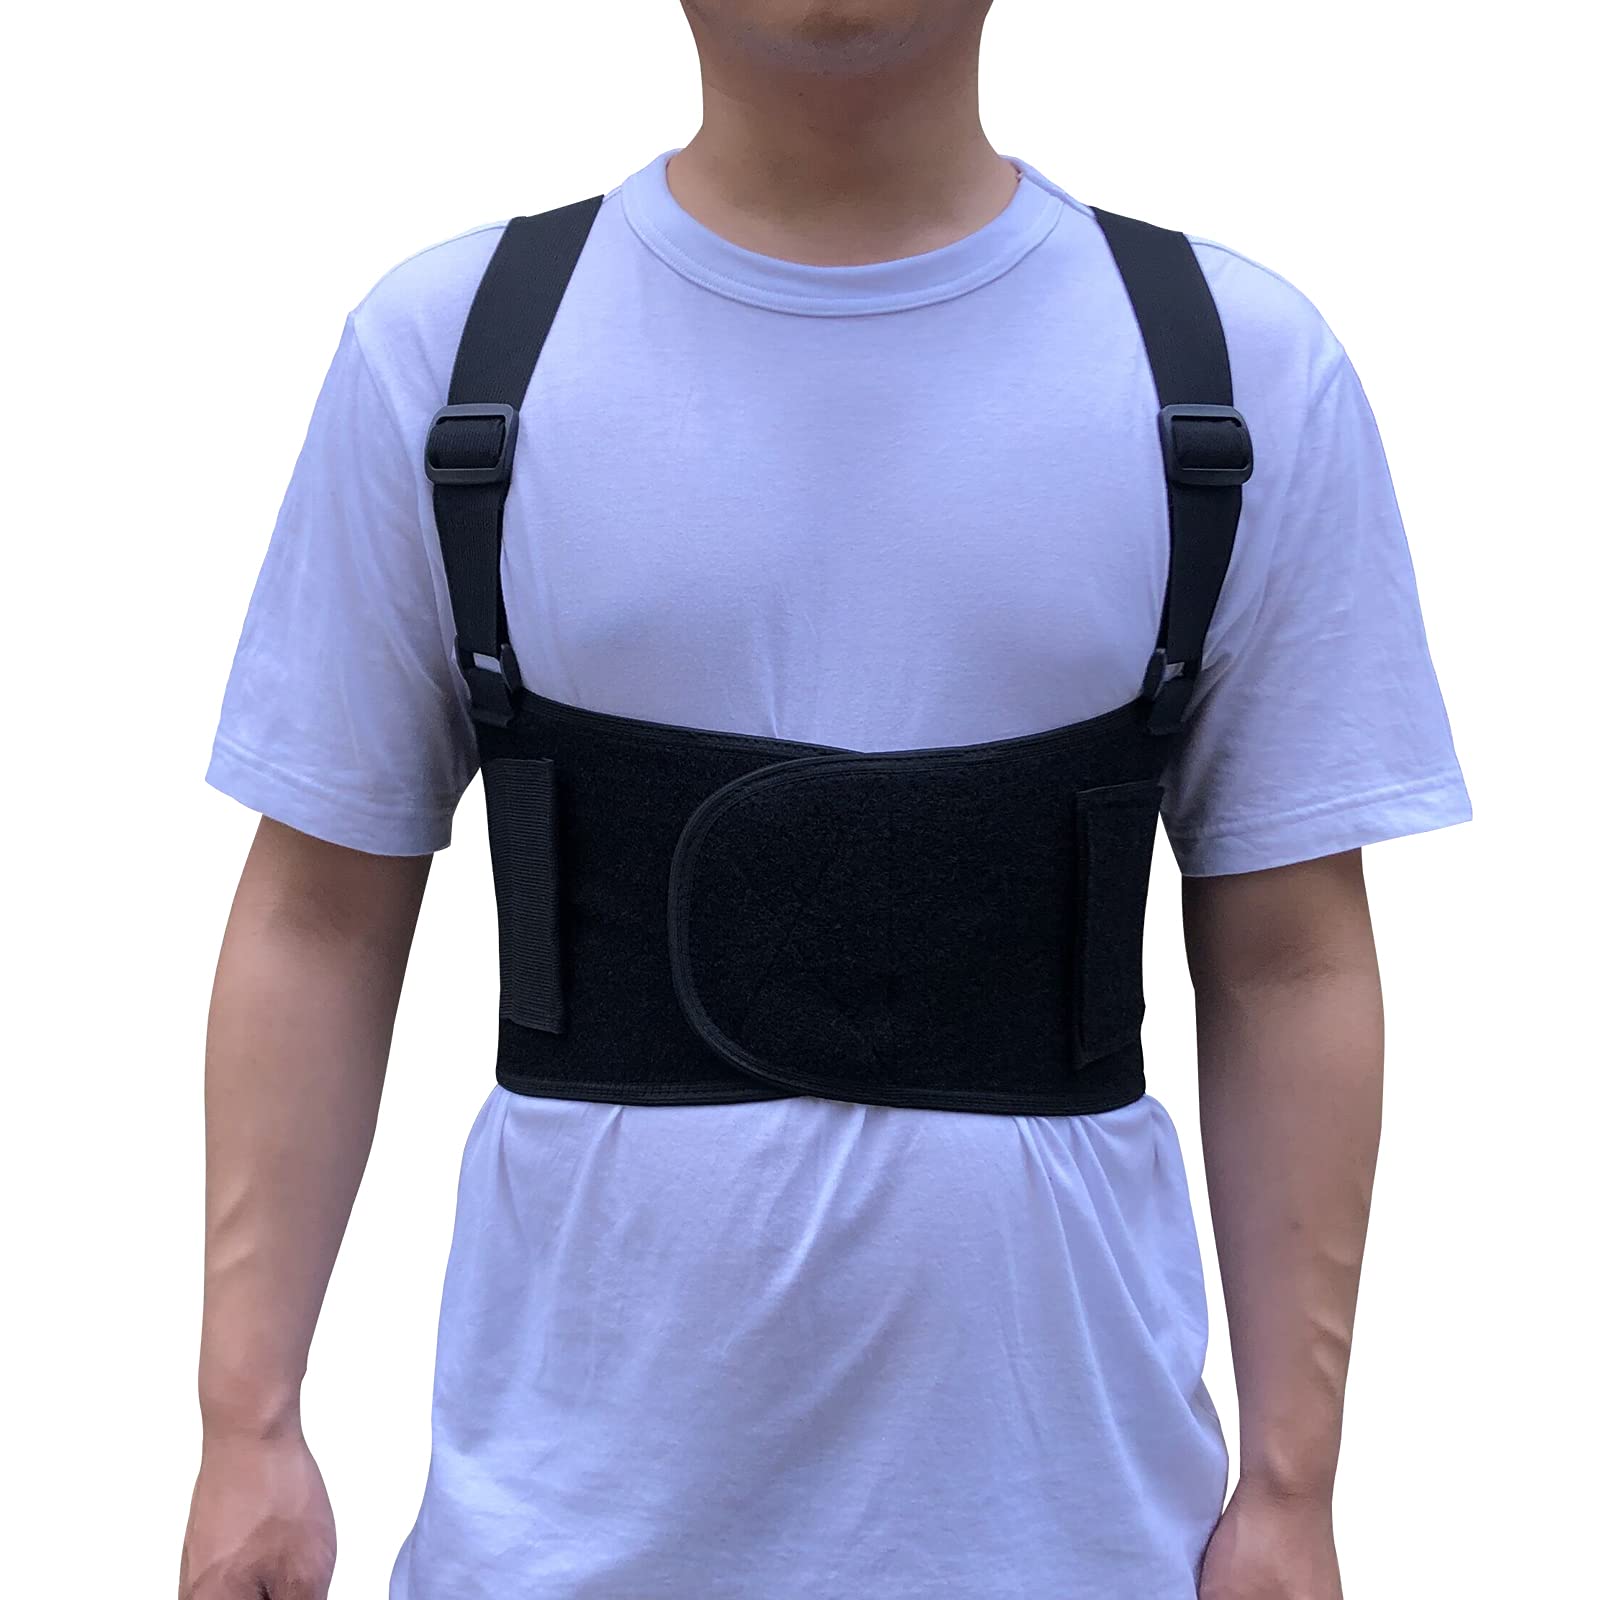 Zaqw Chest Compression Wrap,Chest Wrap Brace Men Women Thoracic Fracture  Fixation Rib Support Belt for Postoperative Rehabilitation,Chest Fracture